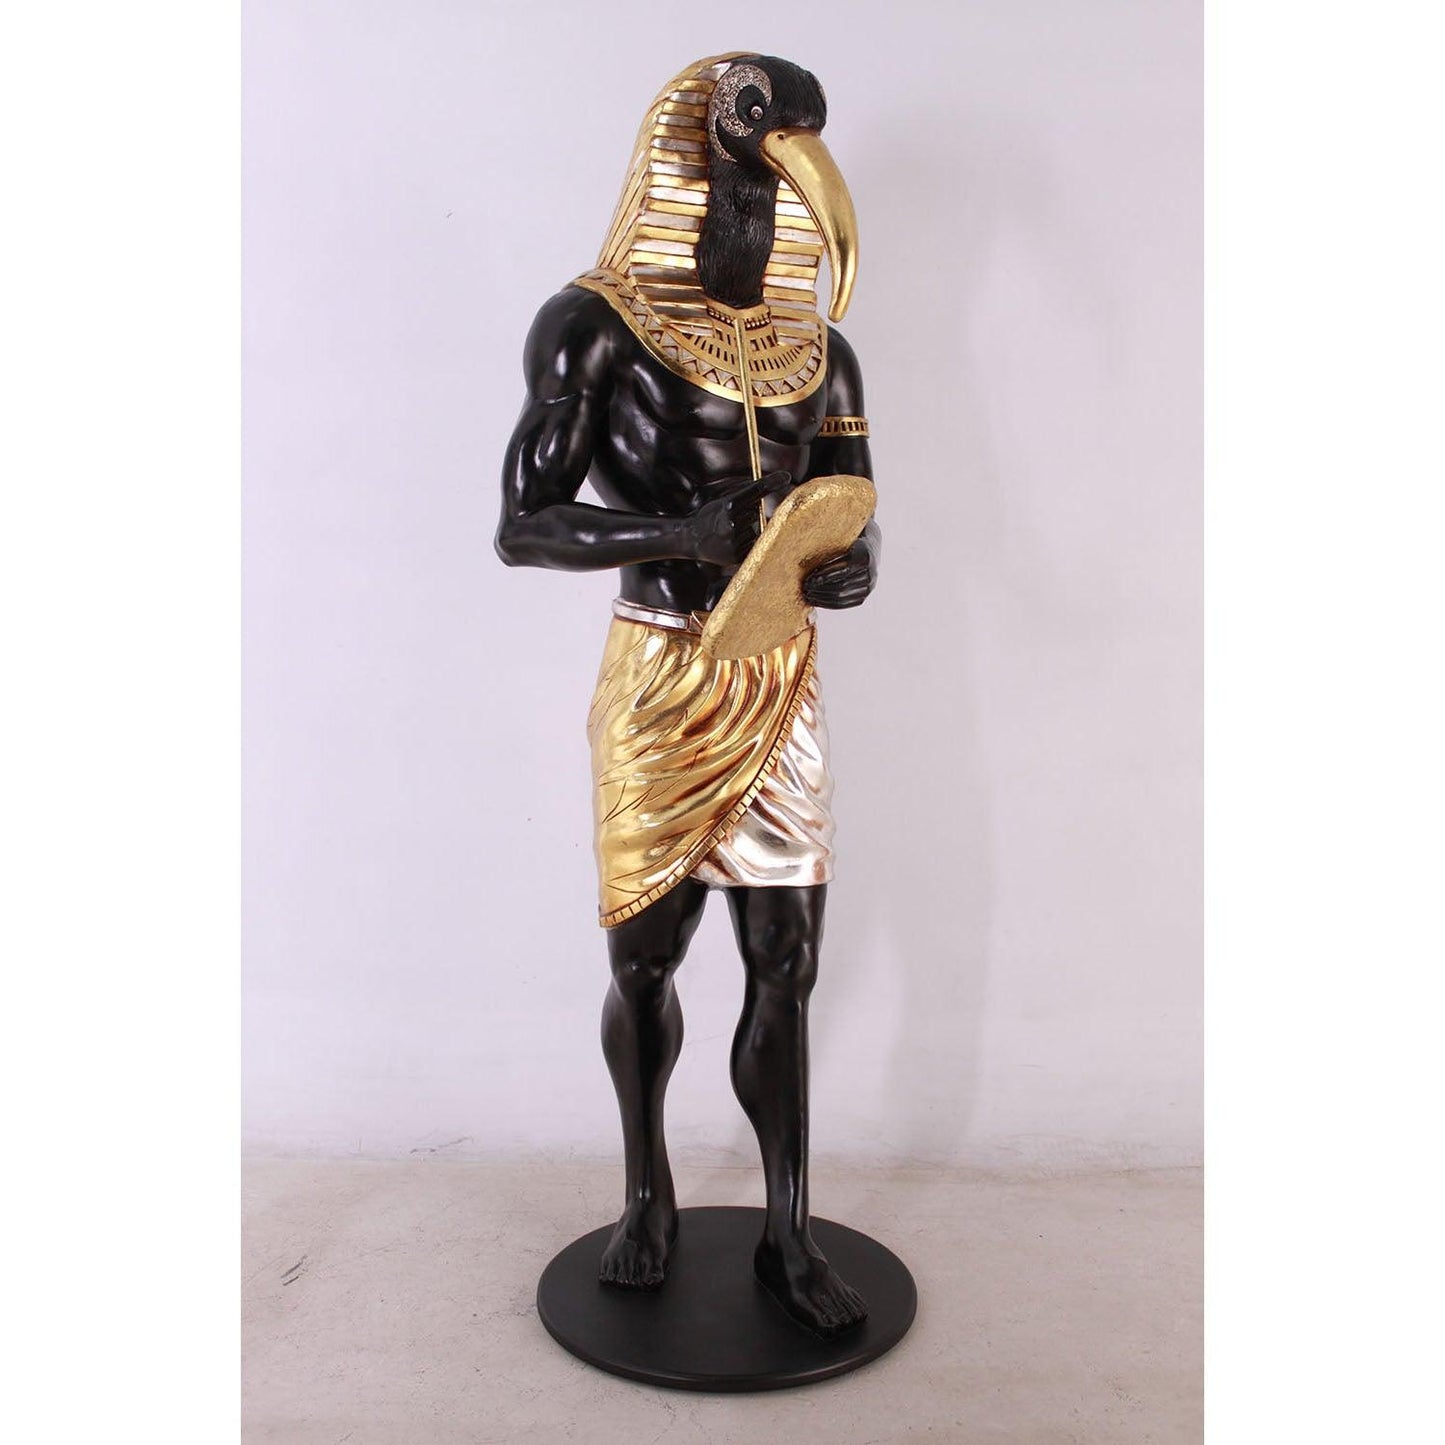 Egyptian Thot Life Size Statue - LM Treasures Prop Rentals 